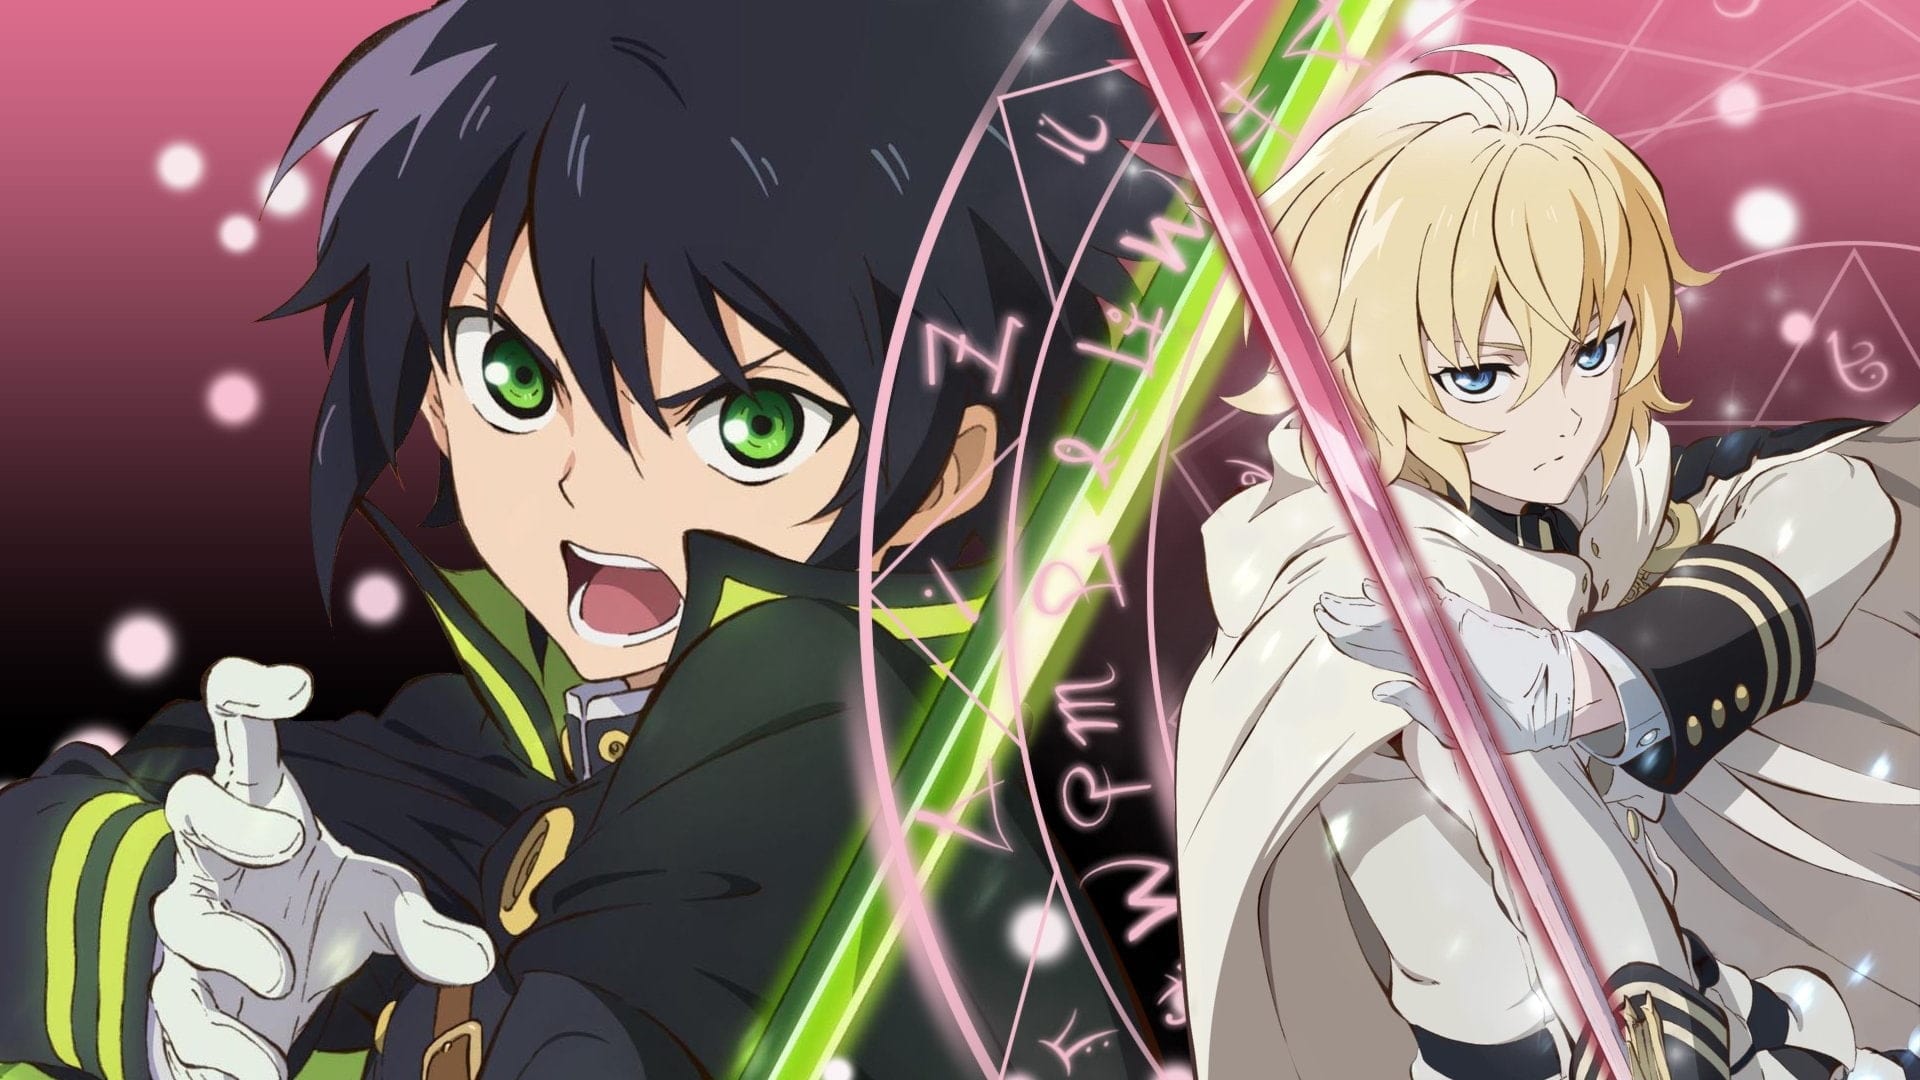 Seraph of the End: Vampire Reign